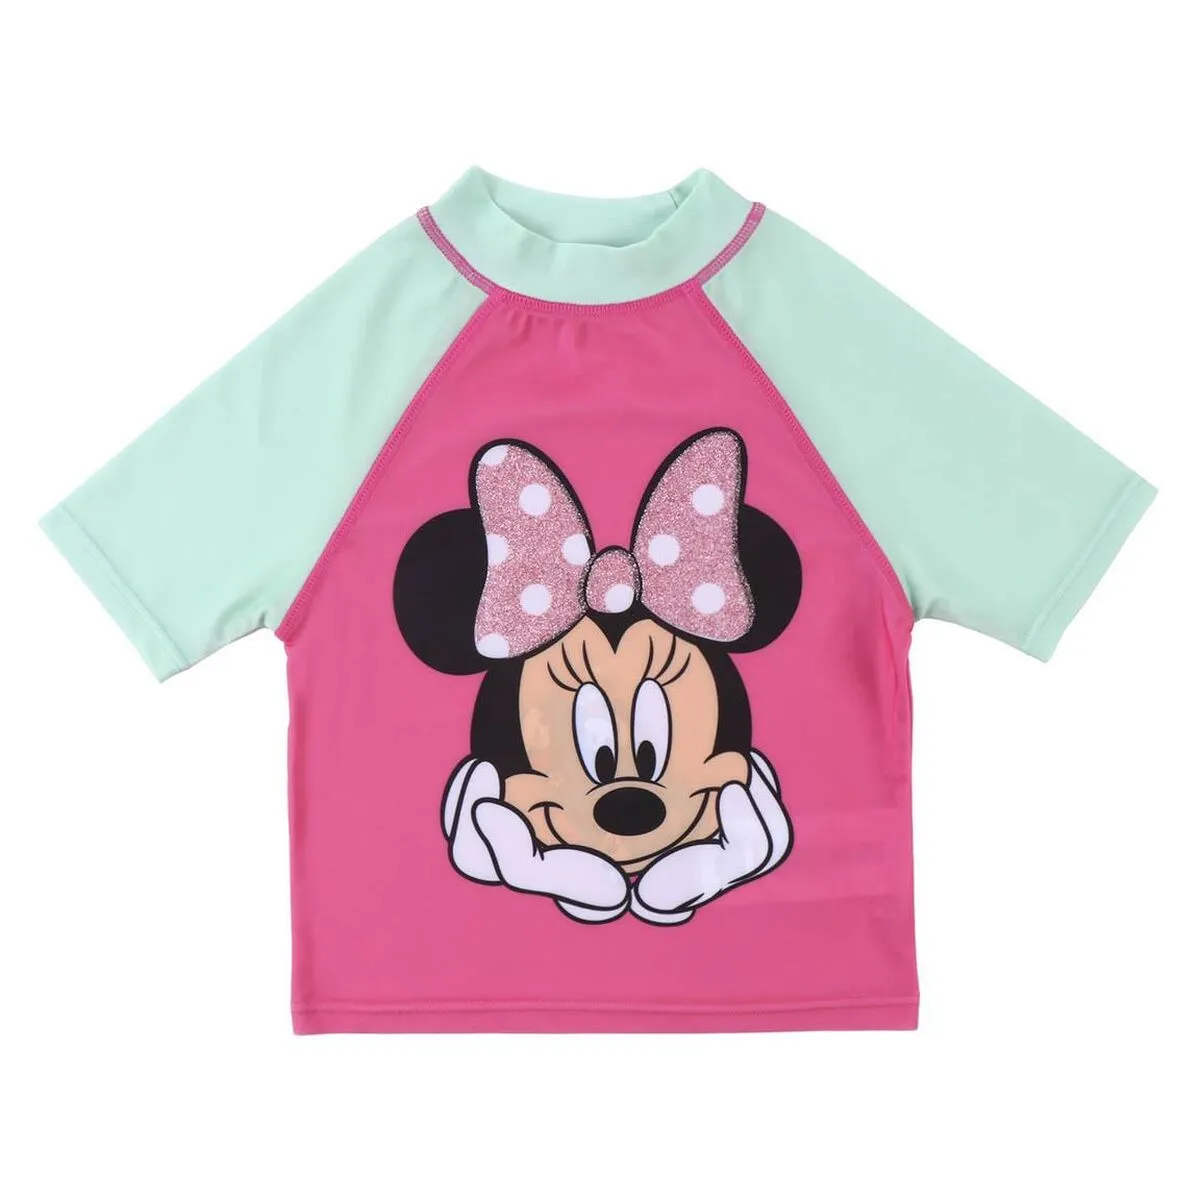 Minnie mouse Bade-T-Shirt Minnie Mouse trkis